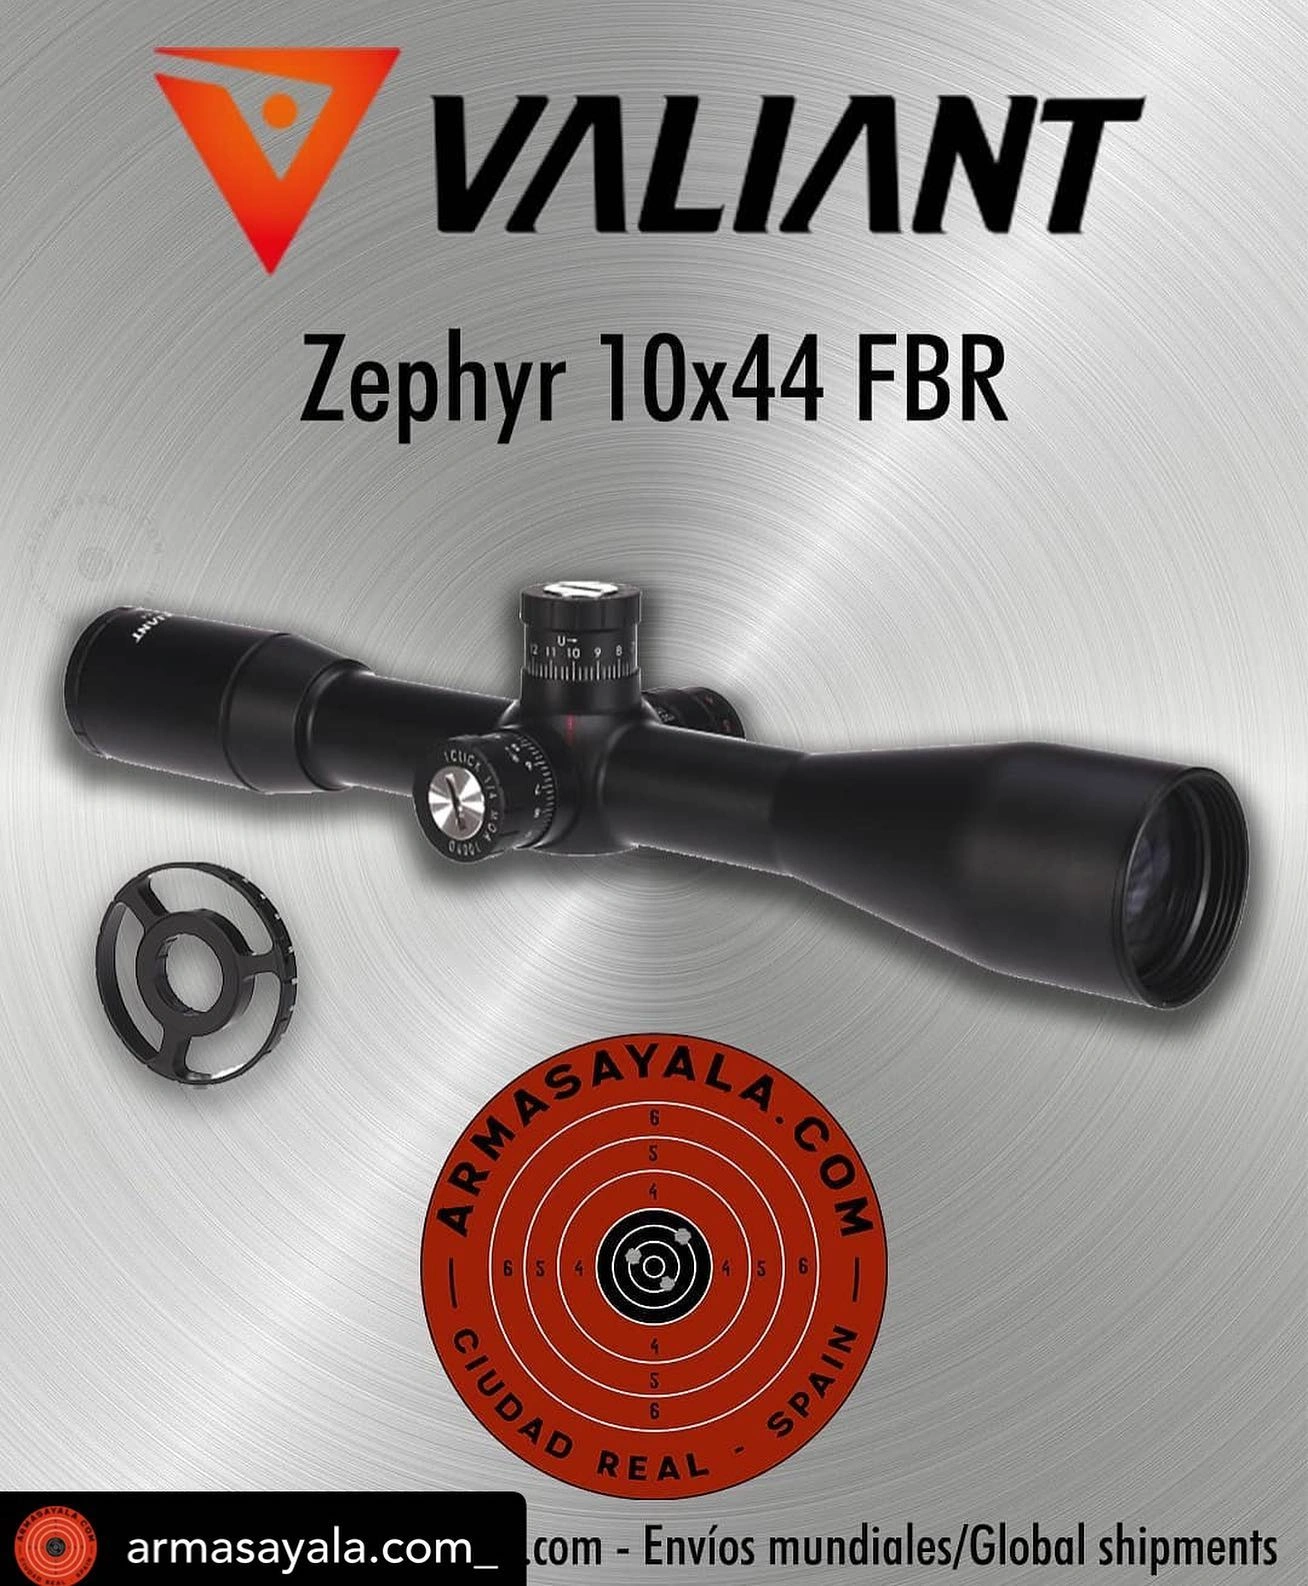 Do you prefer fixed or variable magnification? Let us know in comments👇Valiant scopes can be purchase from our Spanish dealer @armasayala.com_ ✌️ #valiantoptics #valiantzephyr #riflescope #riflescopes #sight #optics #pewpew #guns #weapons #tactical #shooting #hunting #targetshooting